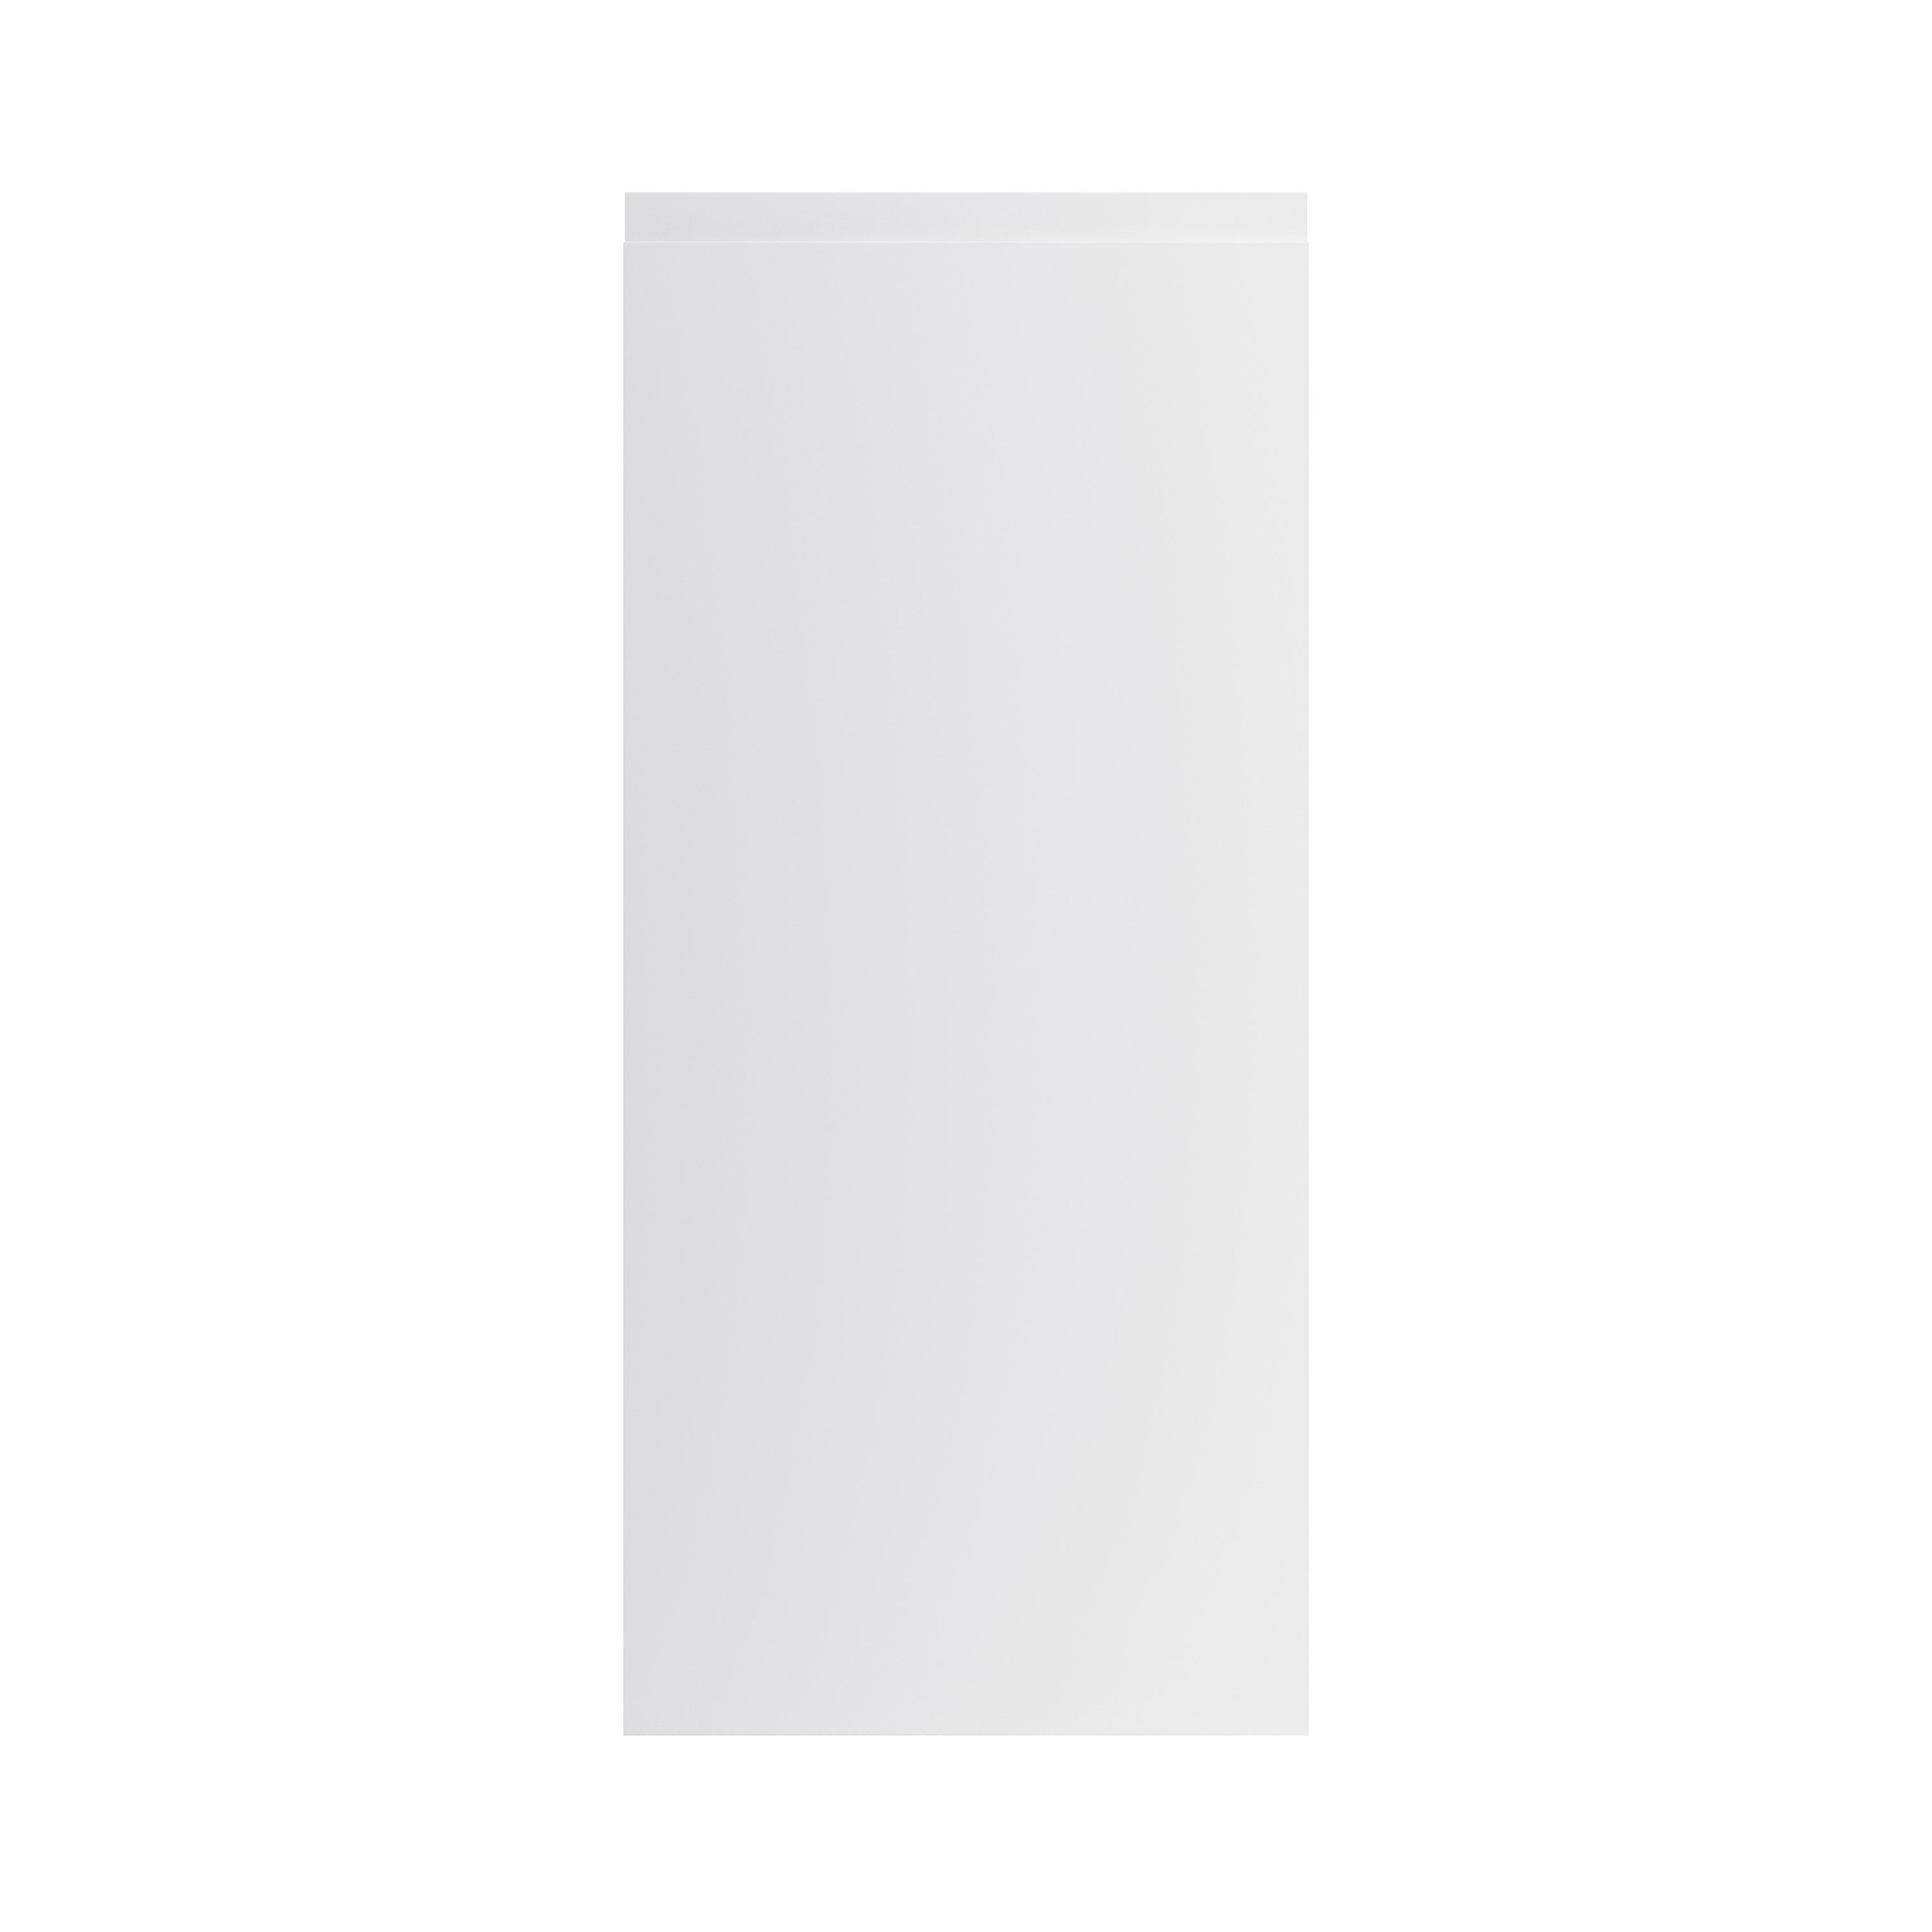 GoodHome Garcinia Gloss light grey integrated handle Tall wall Cabinet door (W)400mm (H)895mm (T)19mm